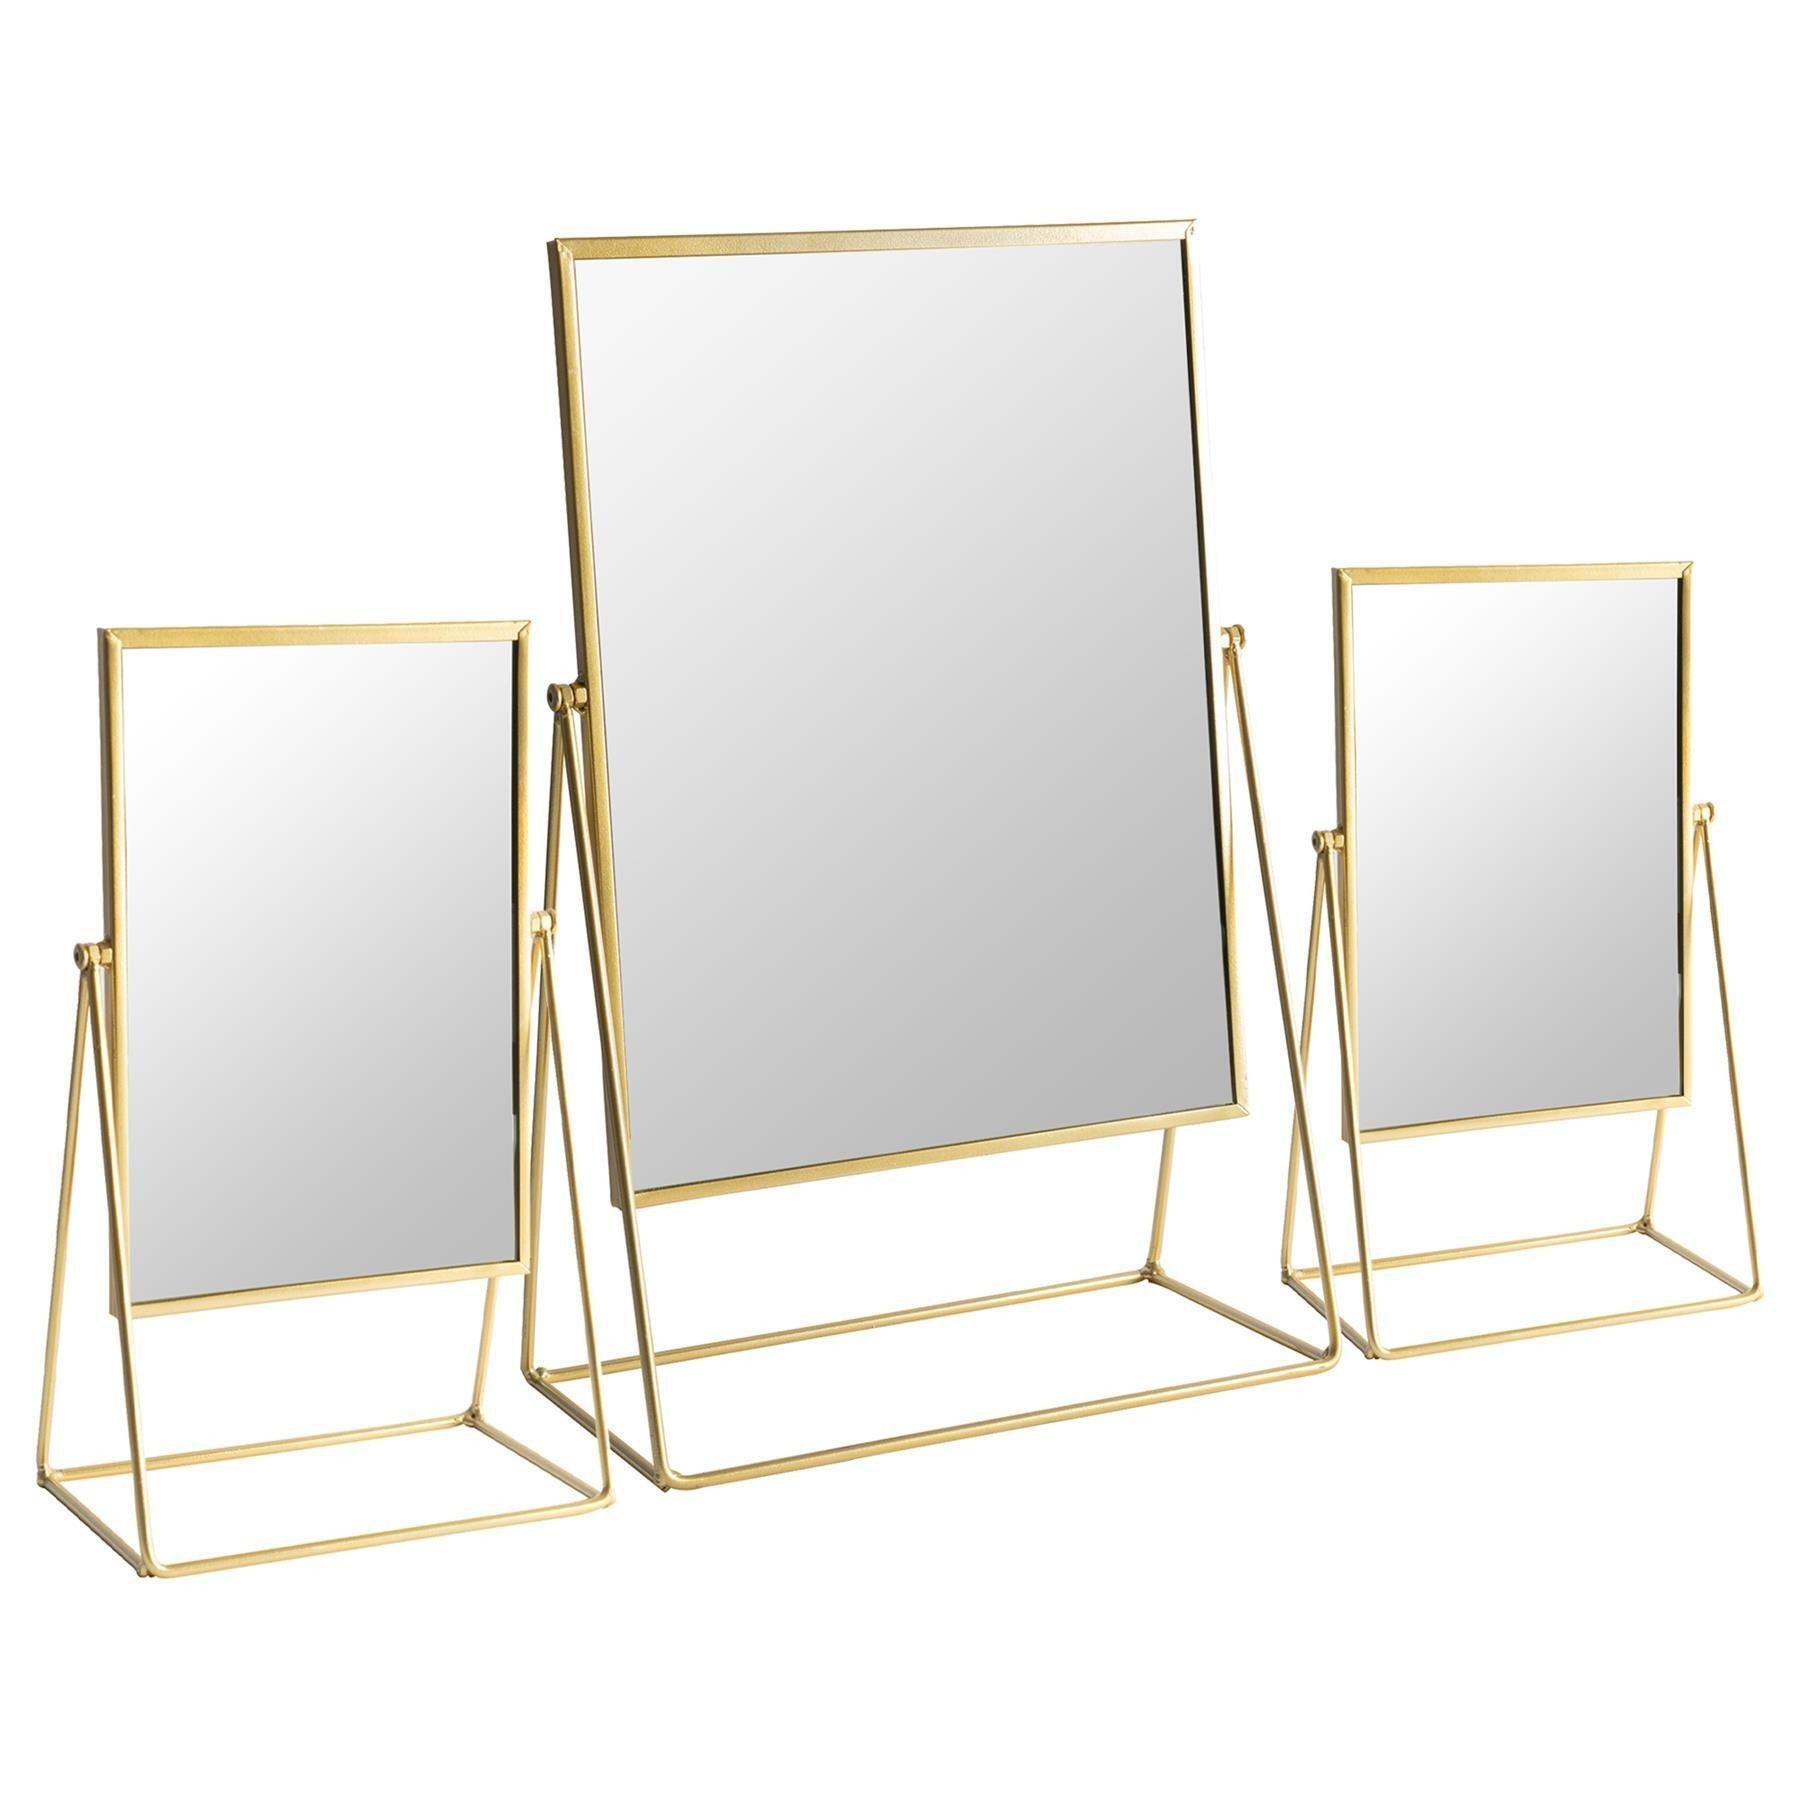 3 Piece Square Dressing Table Mirror Set 2 Sizes - image 1